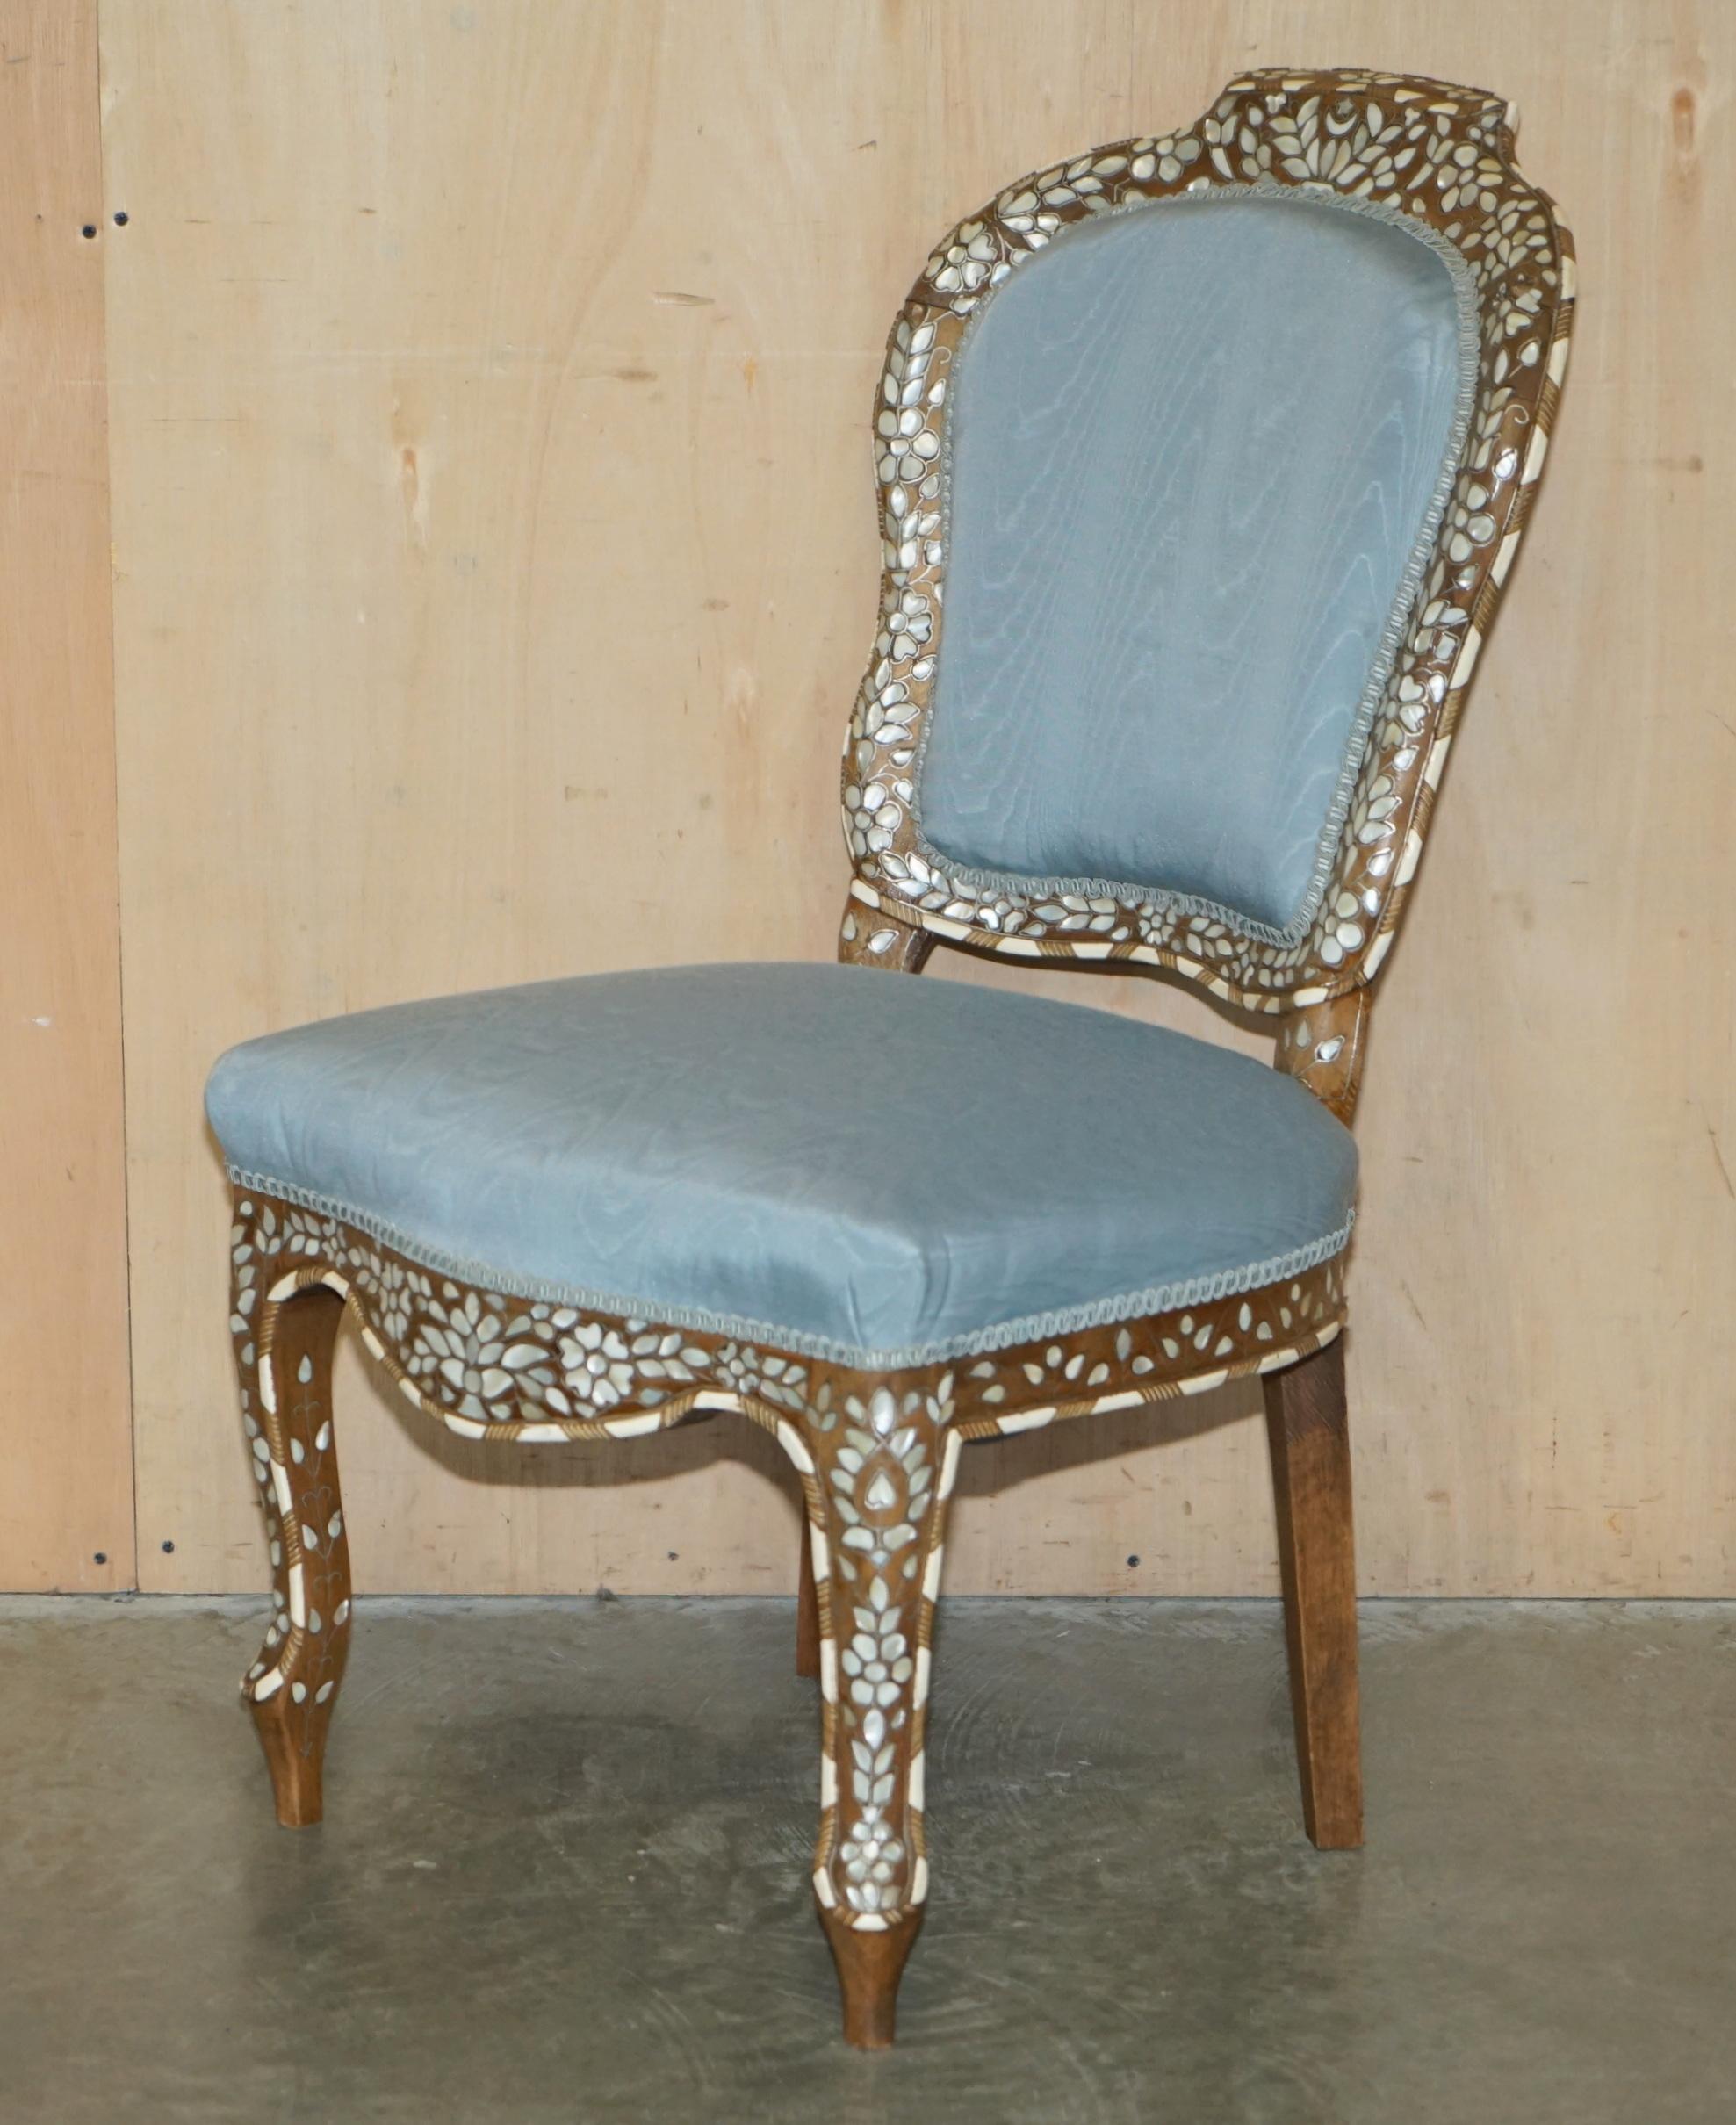 SUBLiME PAIR OF ANTIQUE MOTHER OF PEARL INLAID SIDE CHAIRS WITH HARDWOOD FRAMES For Sale 13